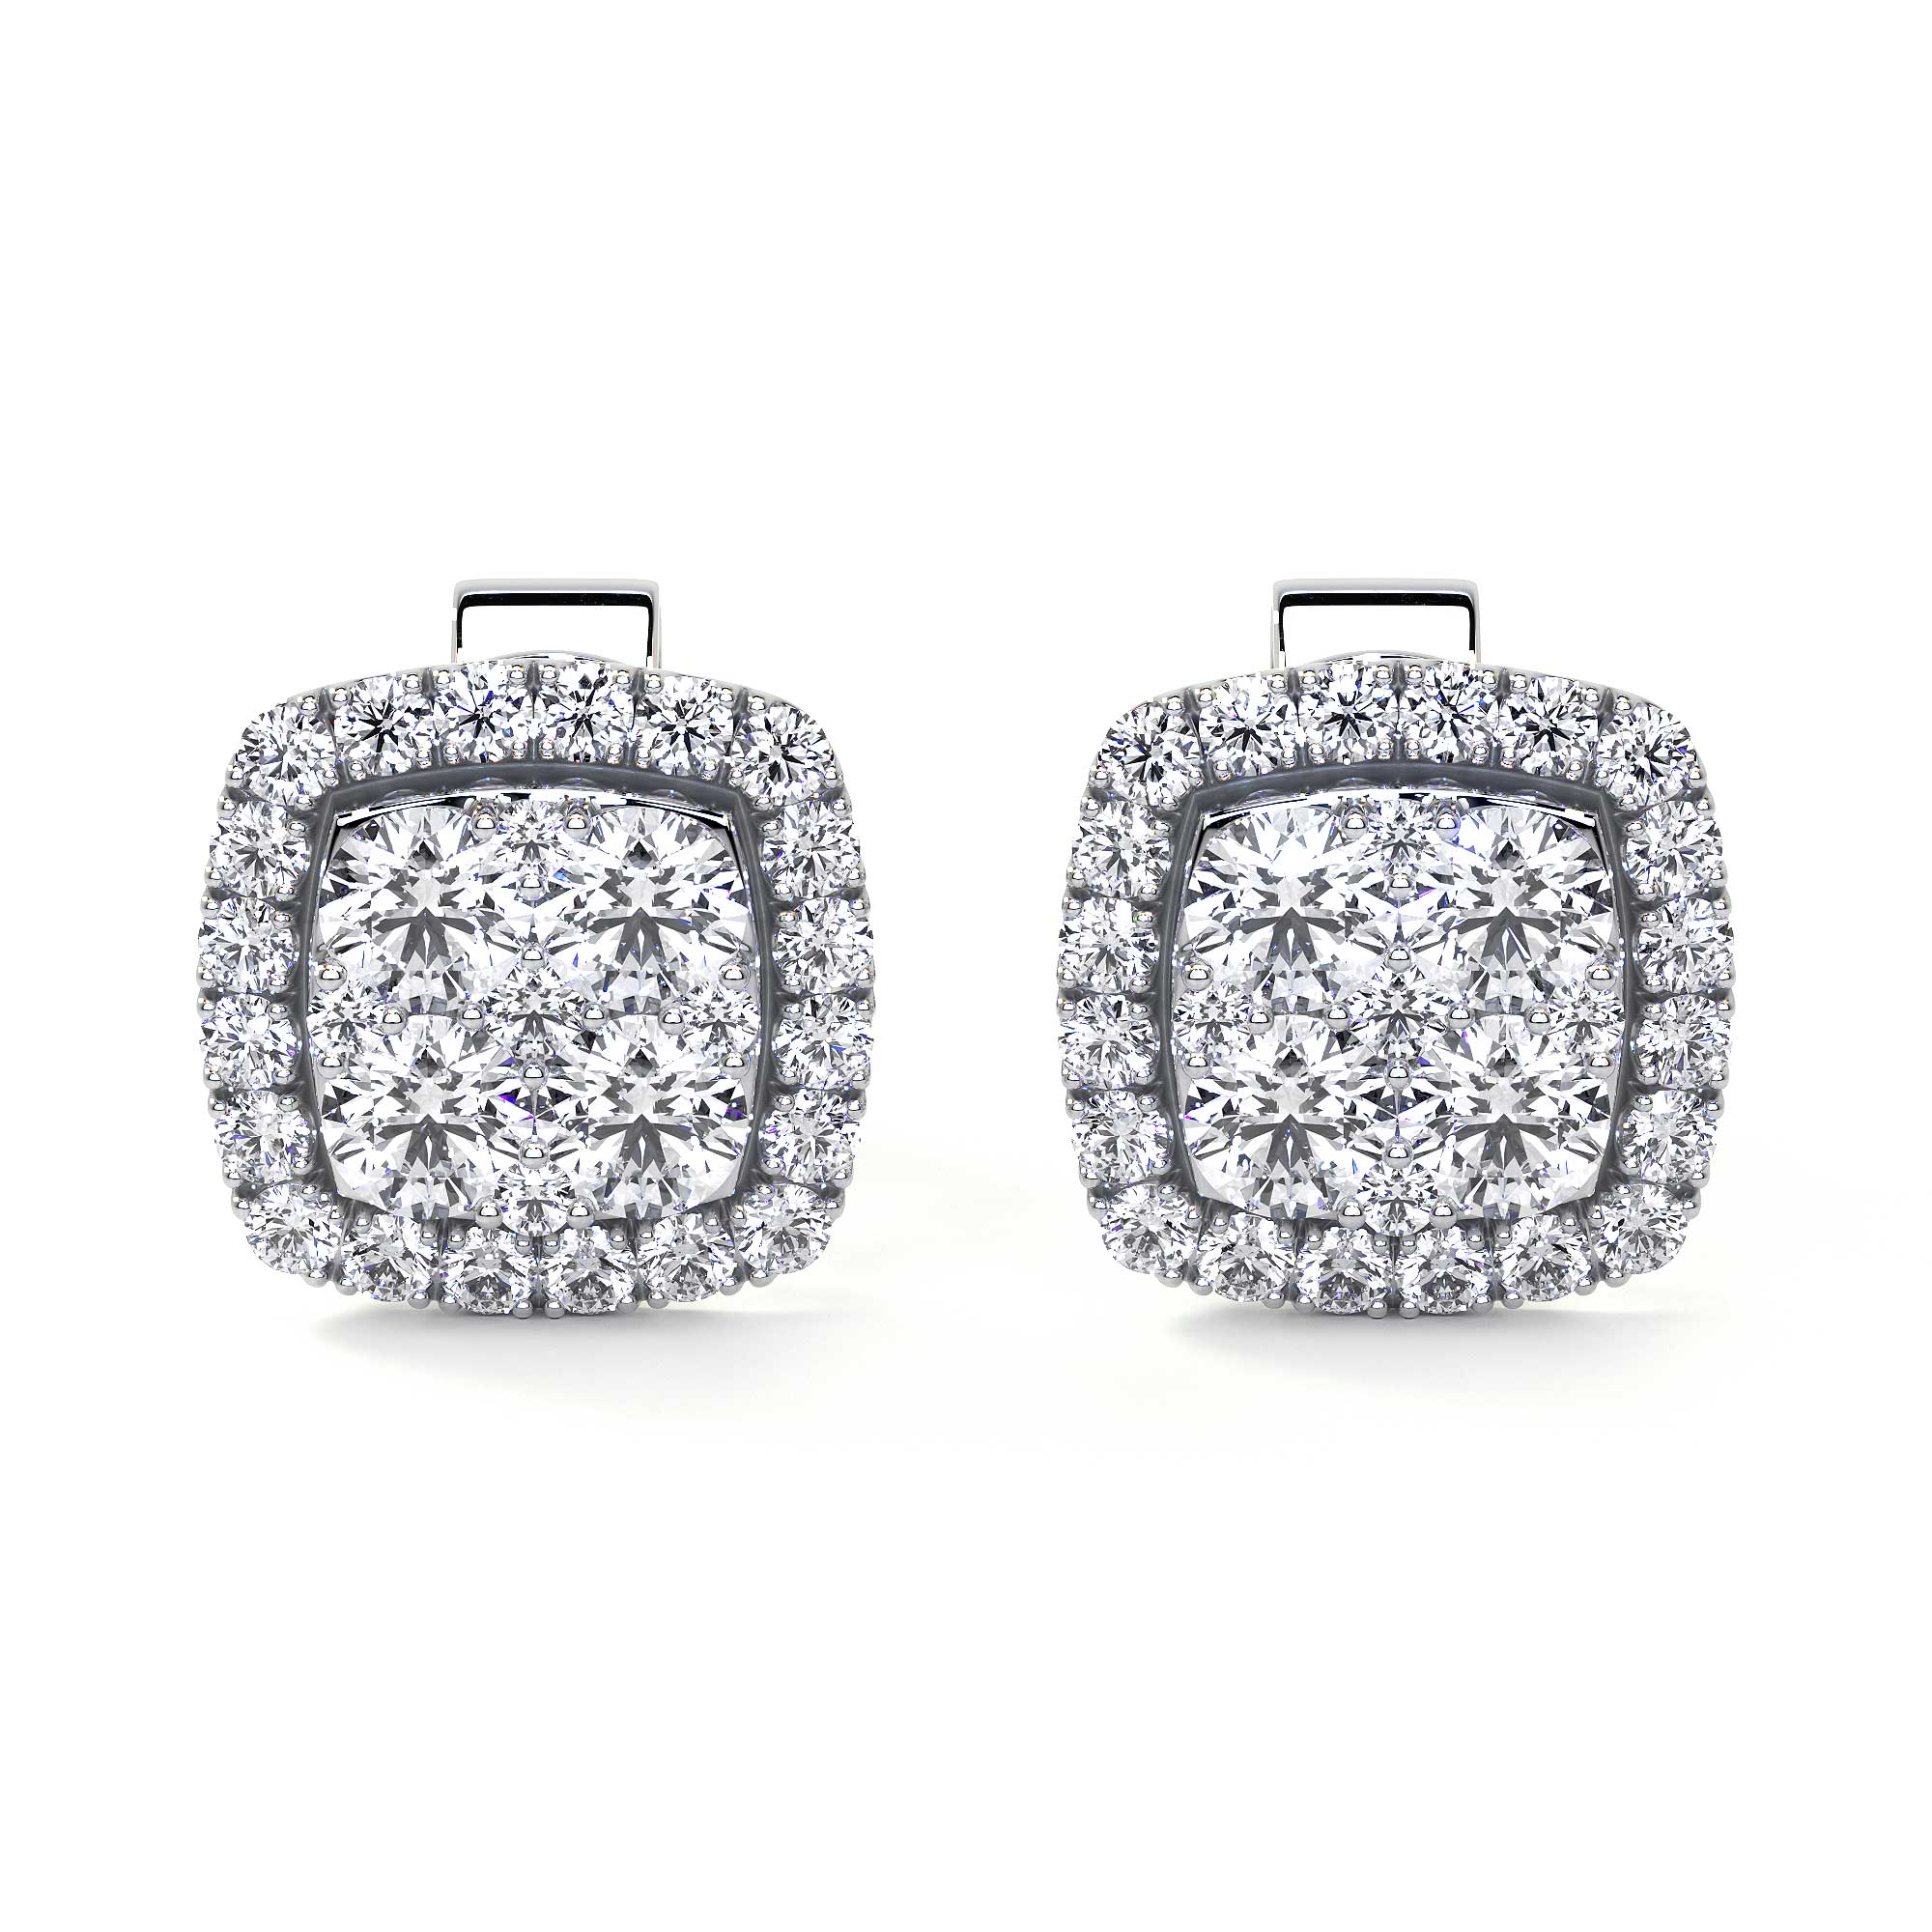 Square Stud Cluster Earrings with Halo - Earrings - Leviev Diamonds